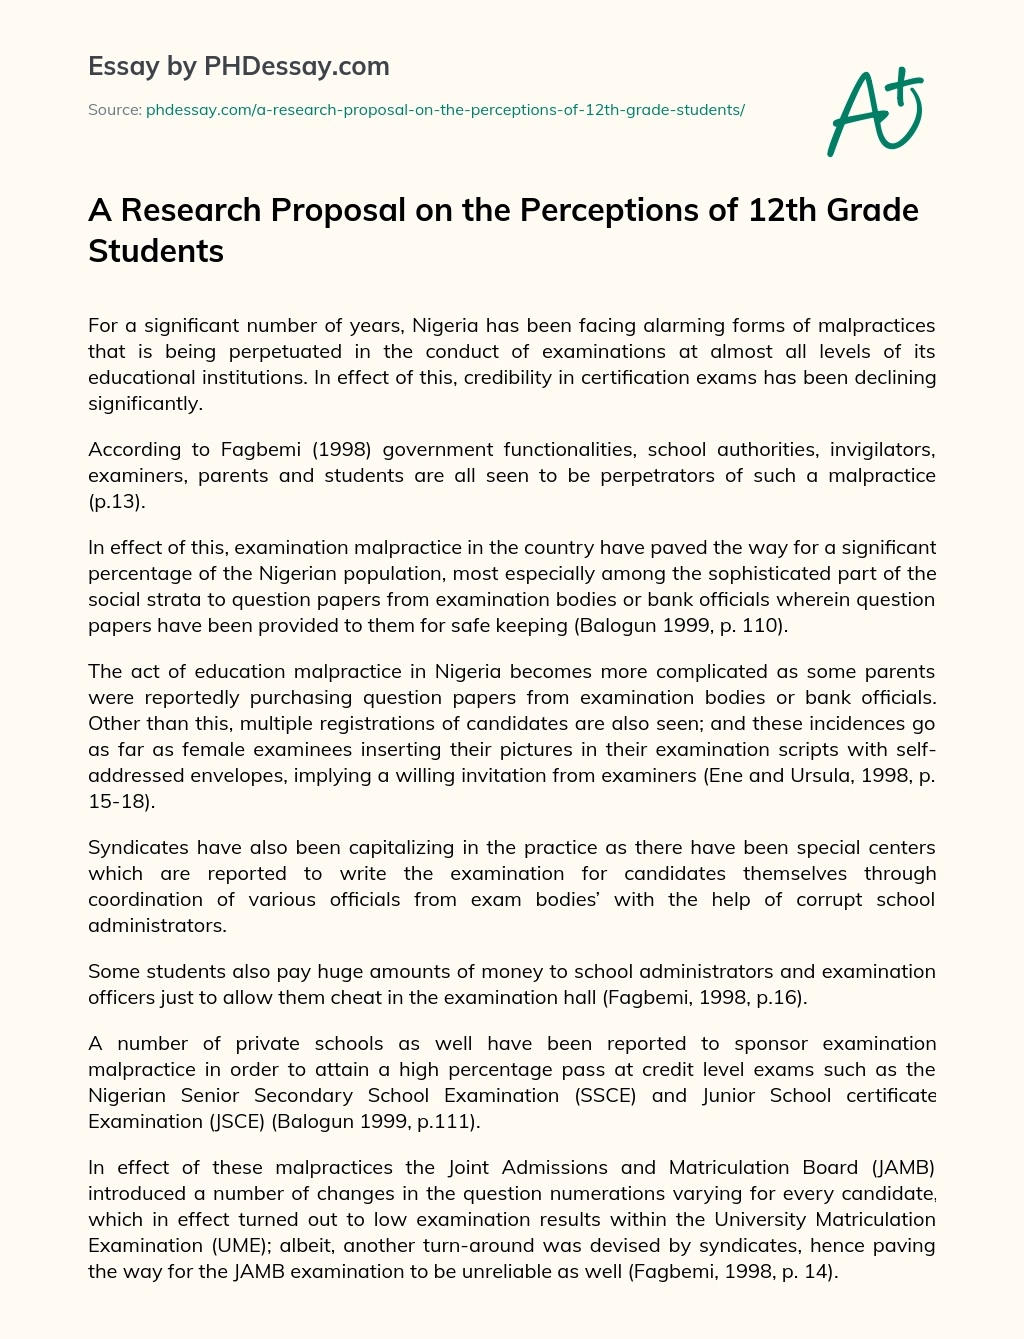 A Research Proposal on the Perceptions of 12th Grade Students essay